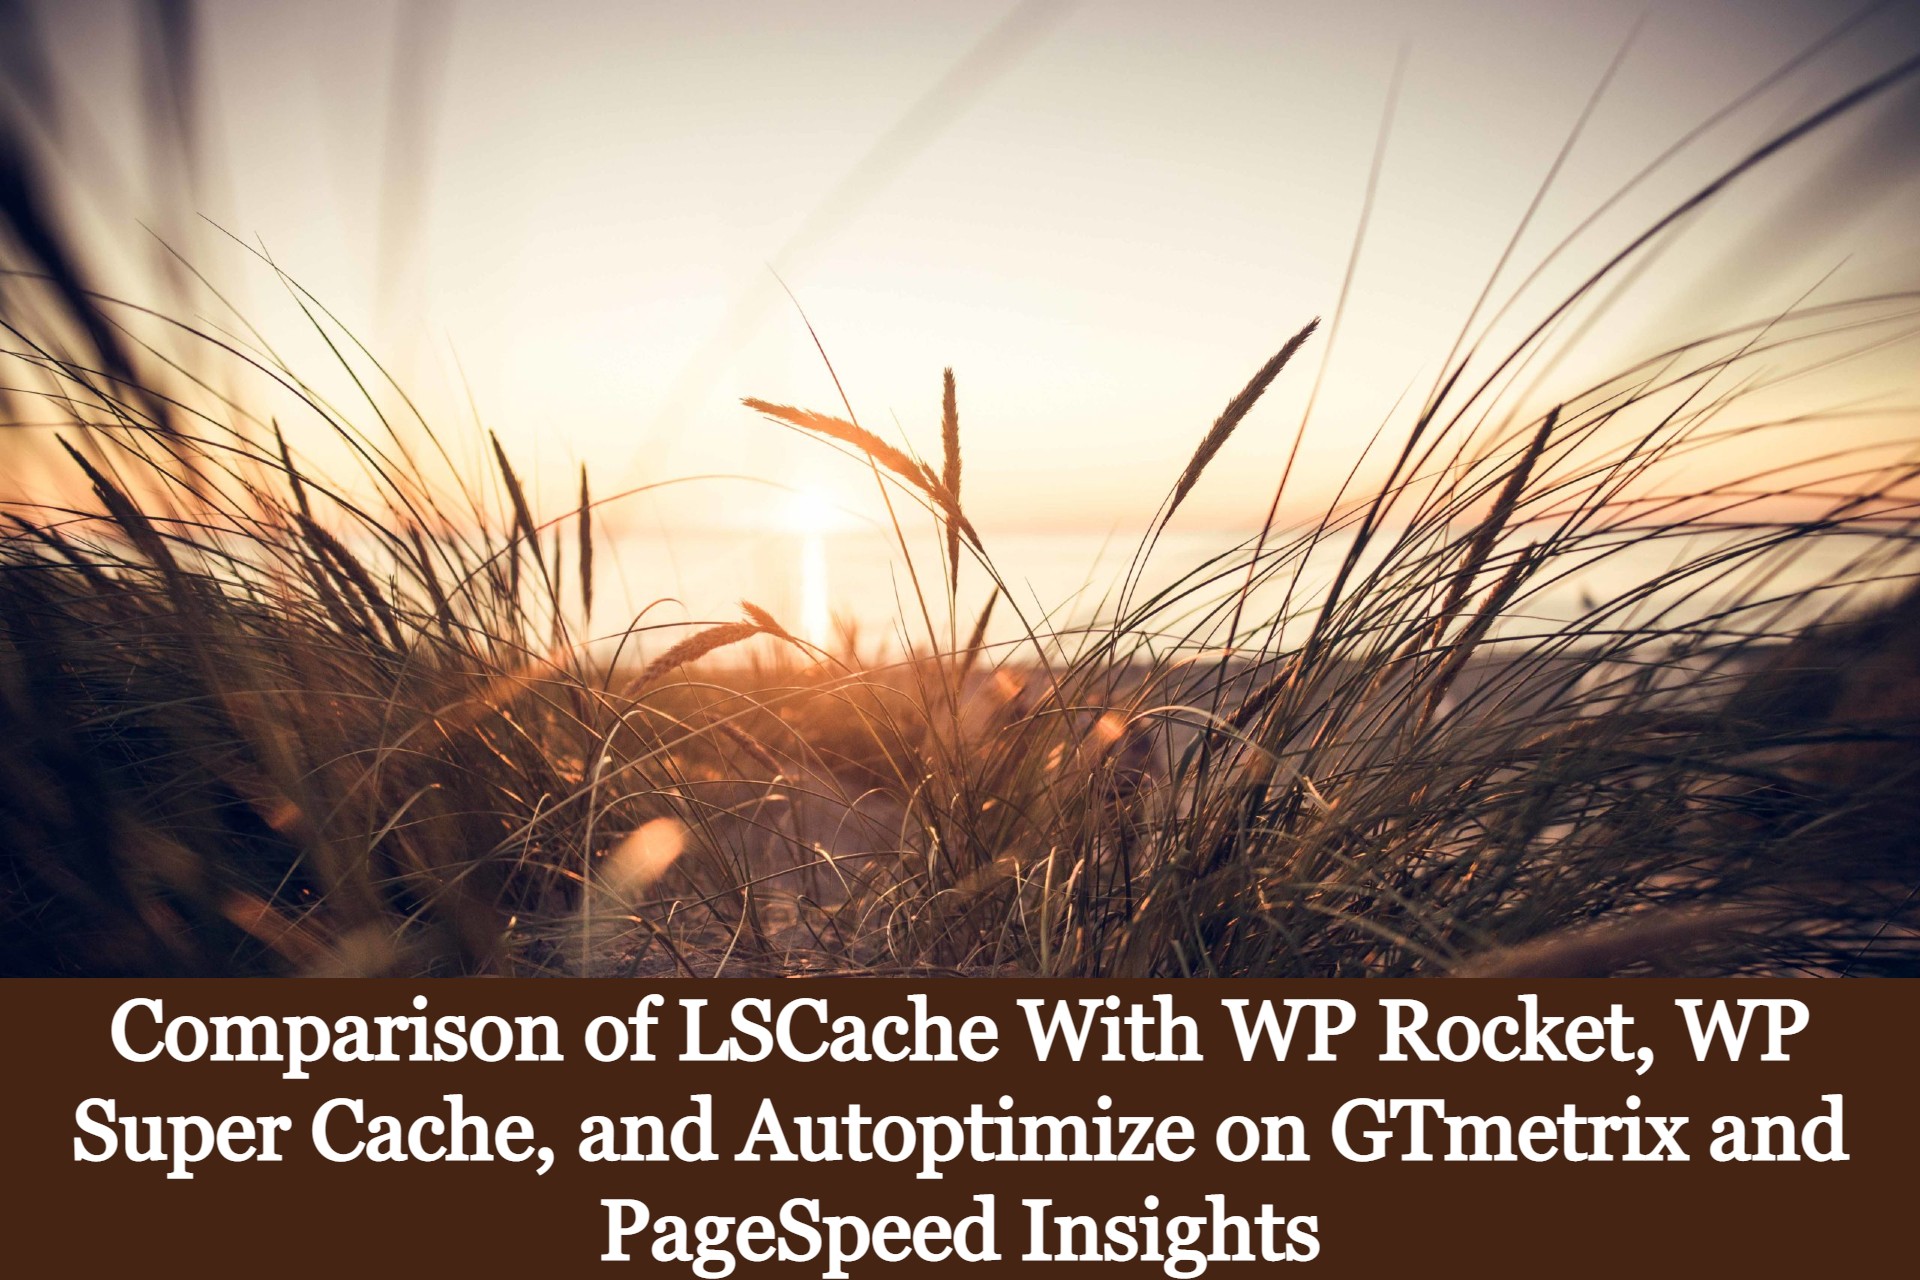 You are currently viewing Comparison of LSCache With WP Rocket, WP Super Cache, and Autoptimize on GTmetrix and PageSpeed Insights